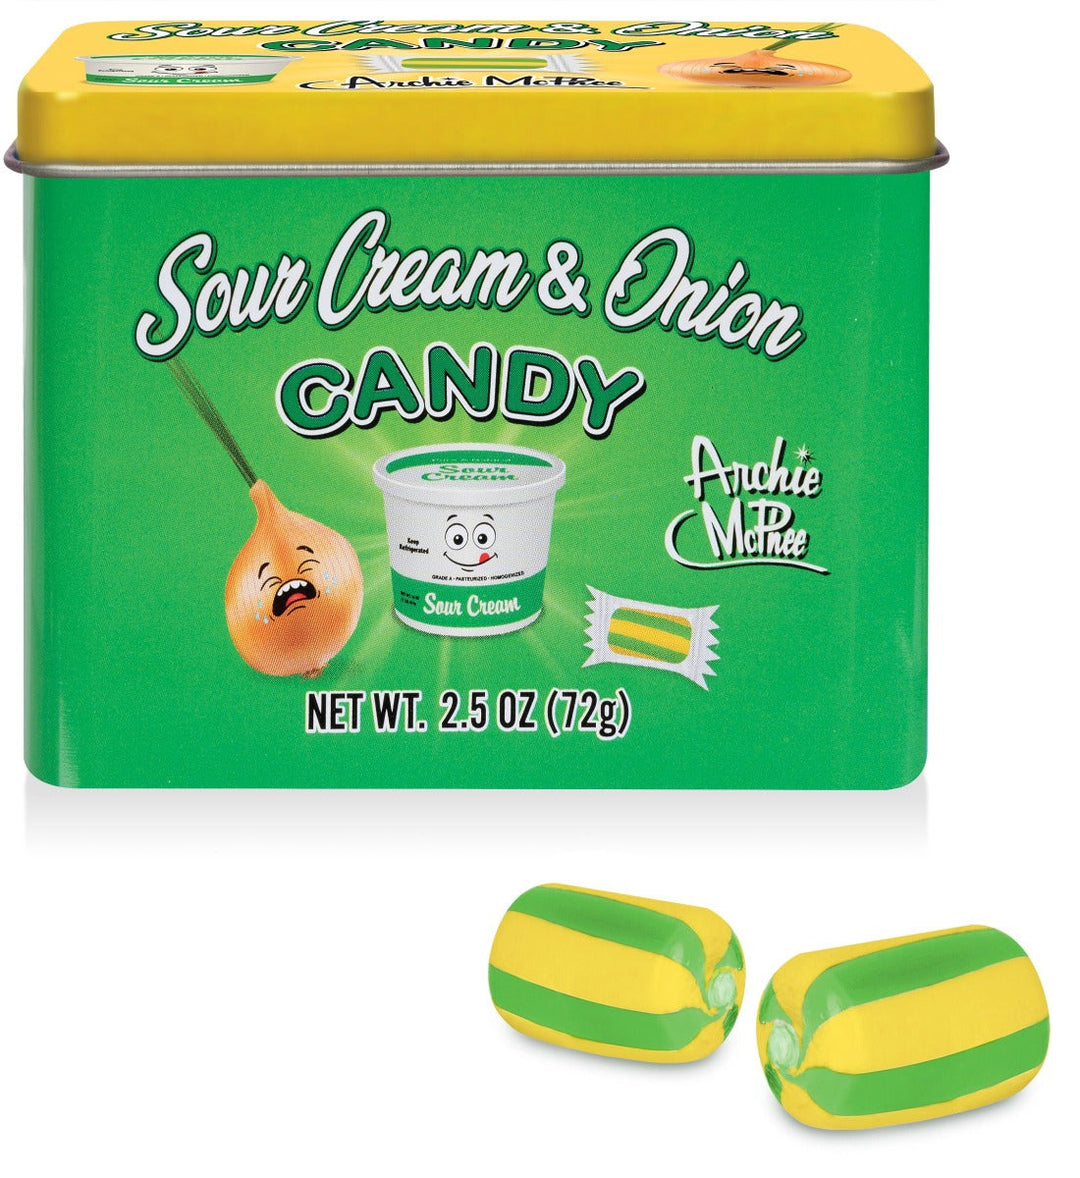 Accoutrements - Archie McPhee Candy Sour Cream & Onion Candy Tin